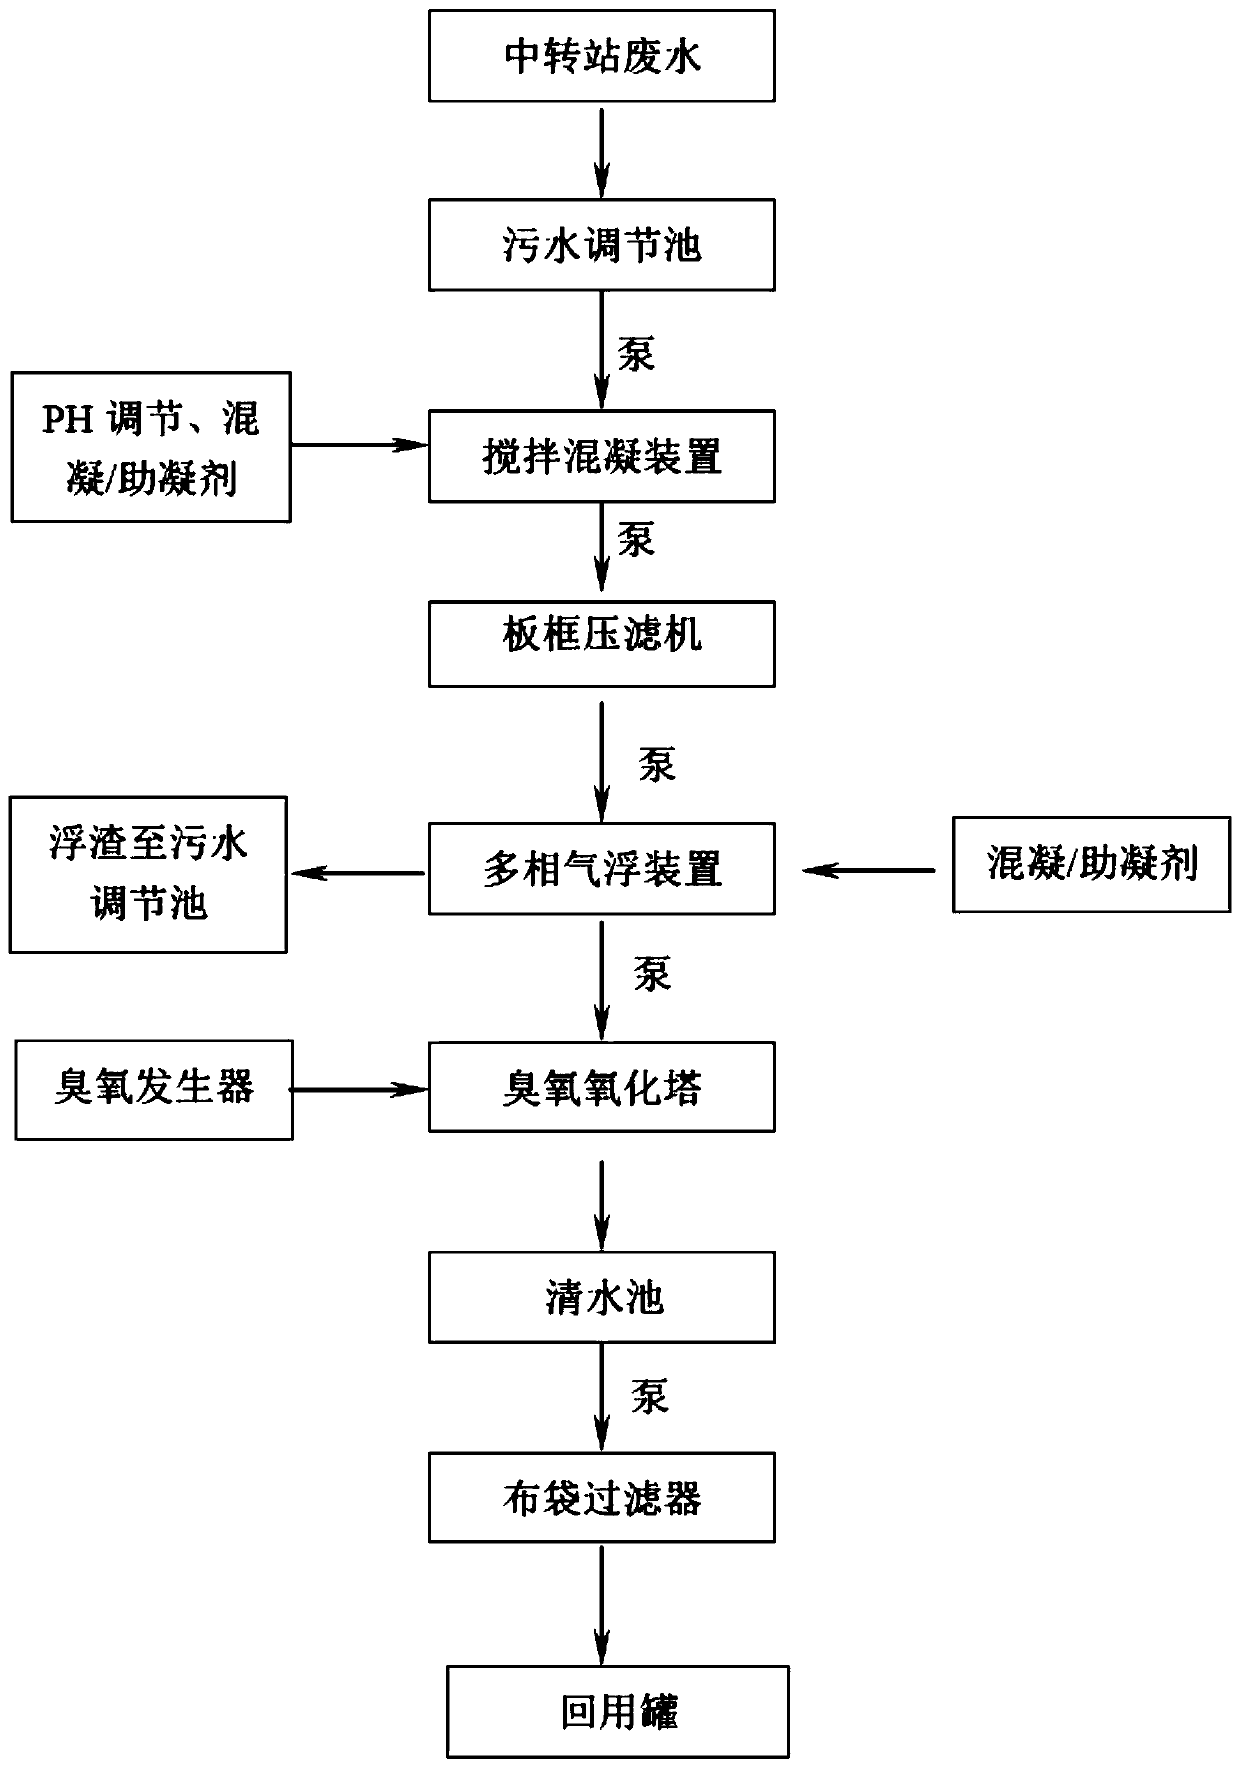 System and method for treating and recycling sewage of portable garbage transfer station